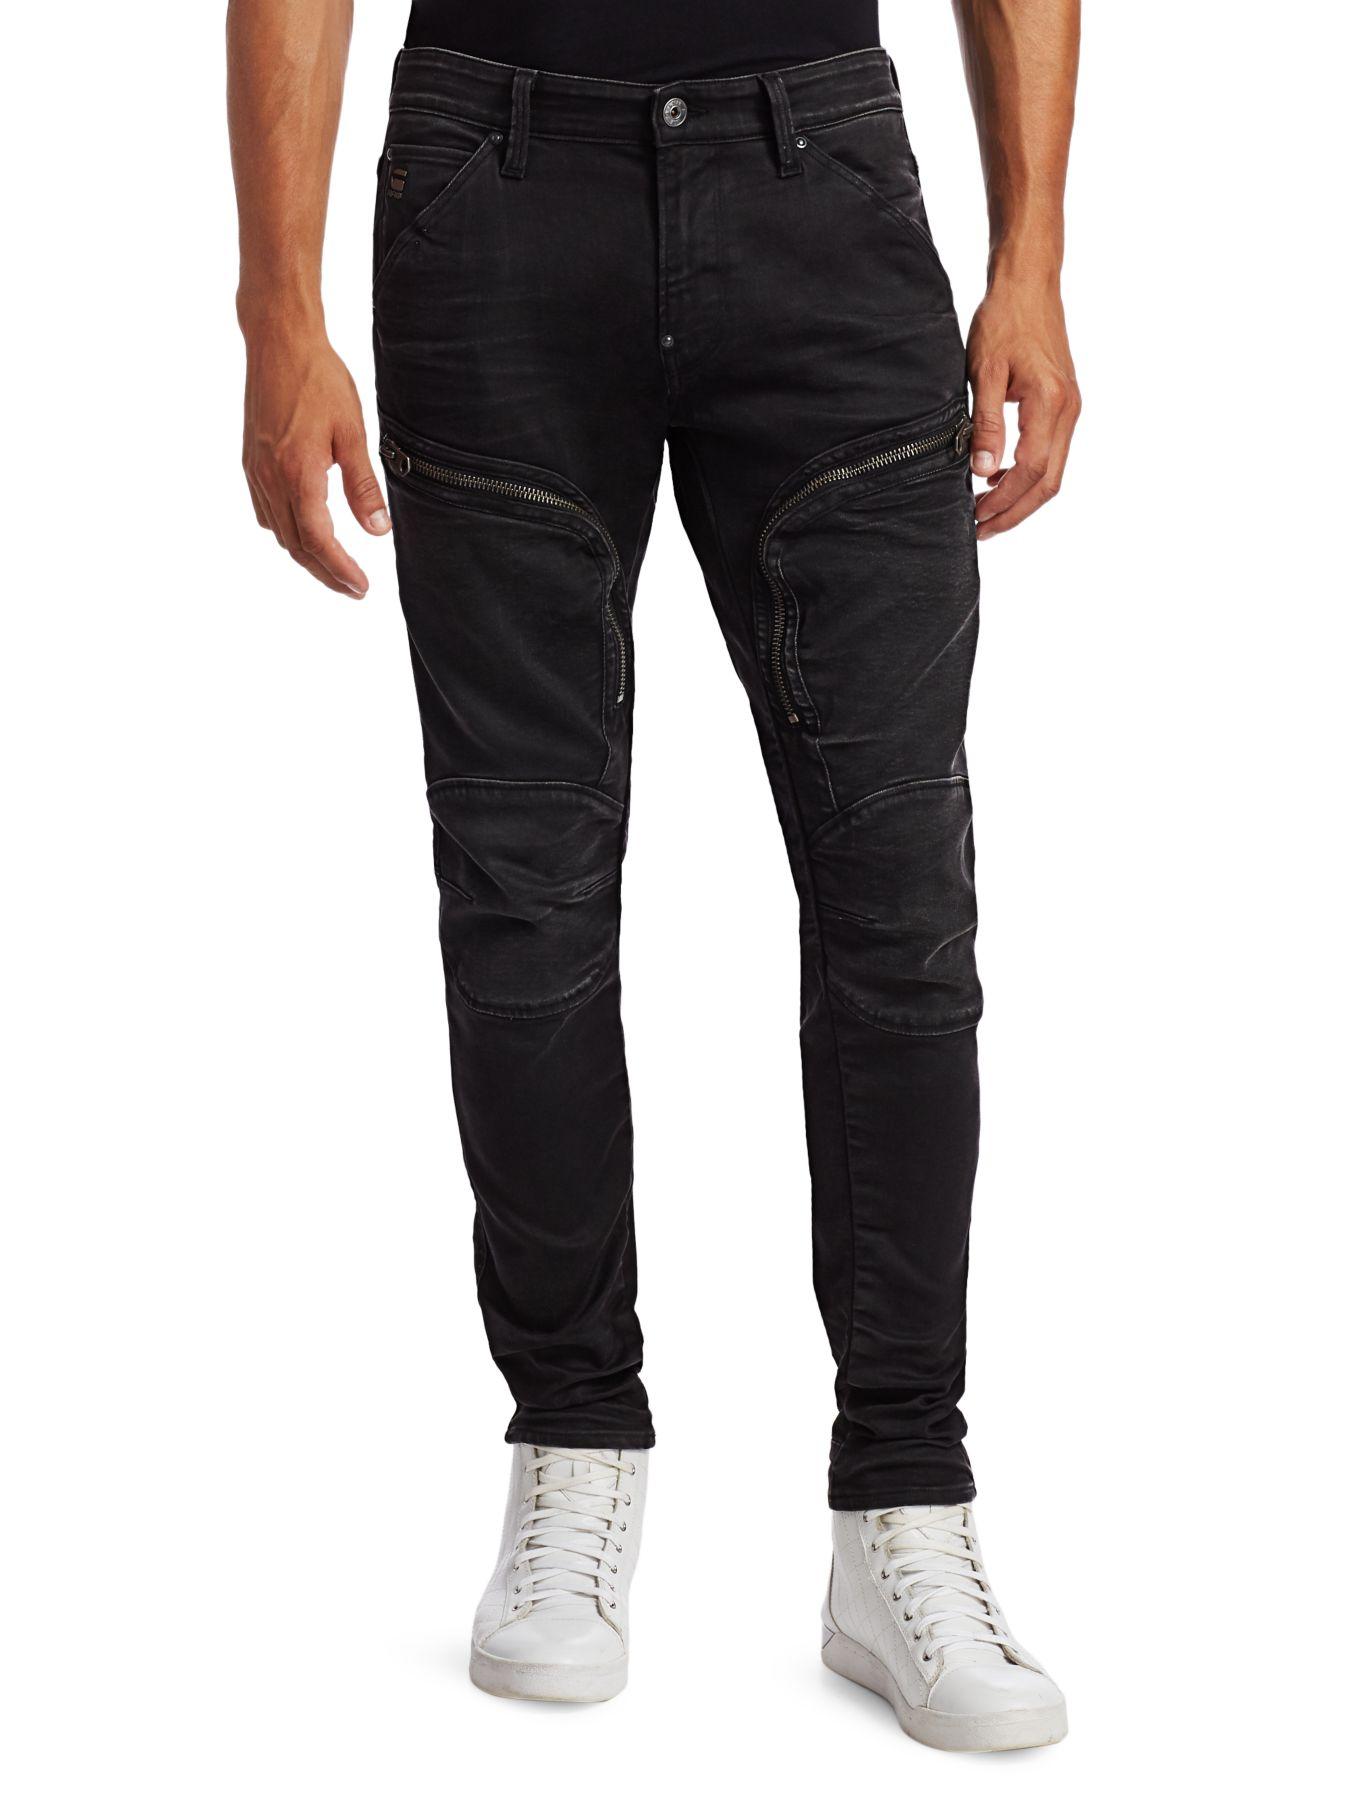 G-Star RAW Air Defence Zip Skinny Jeans in Black for Men | Lyst